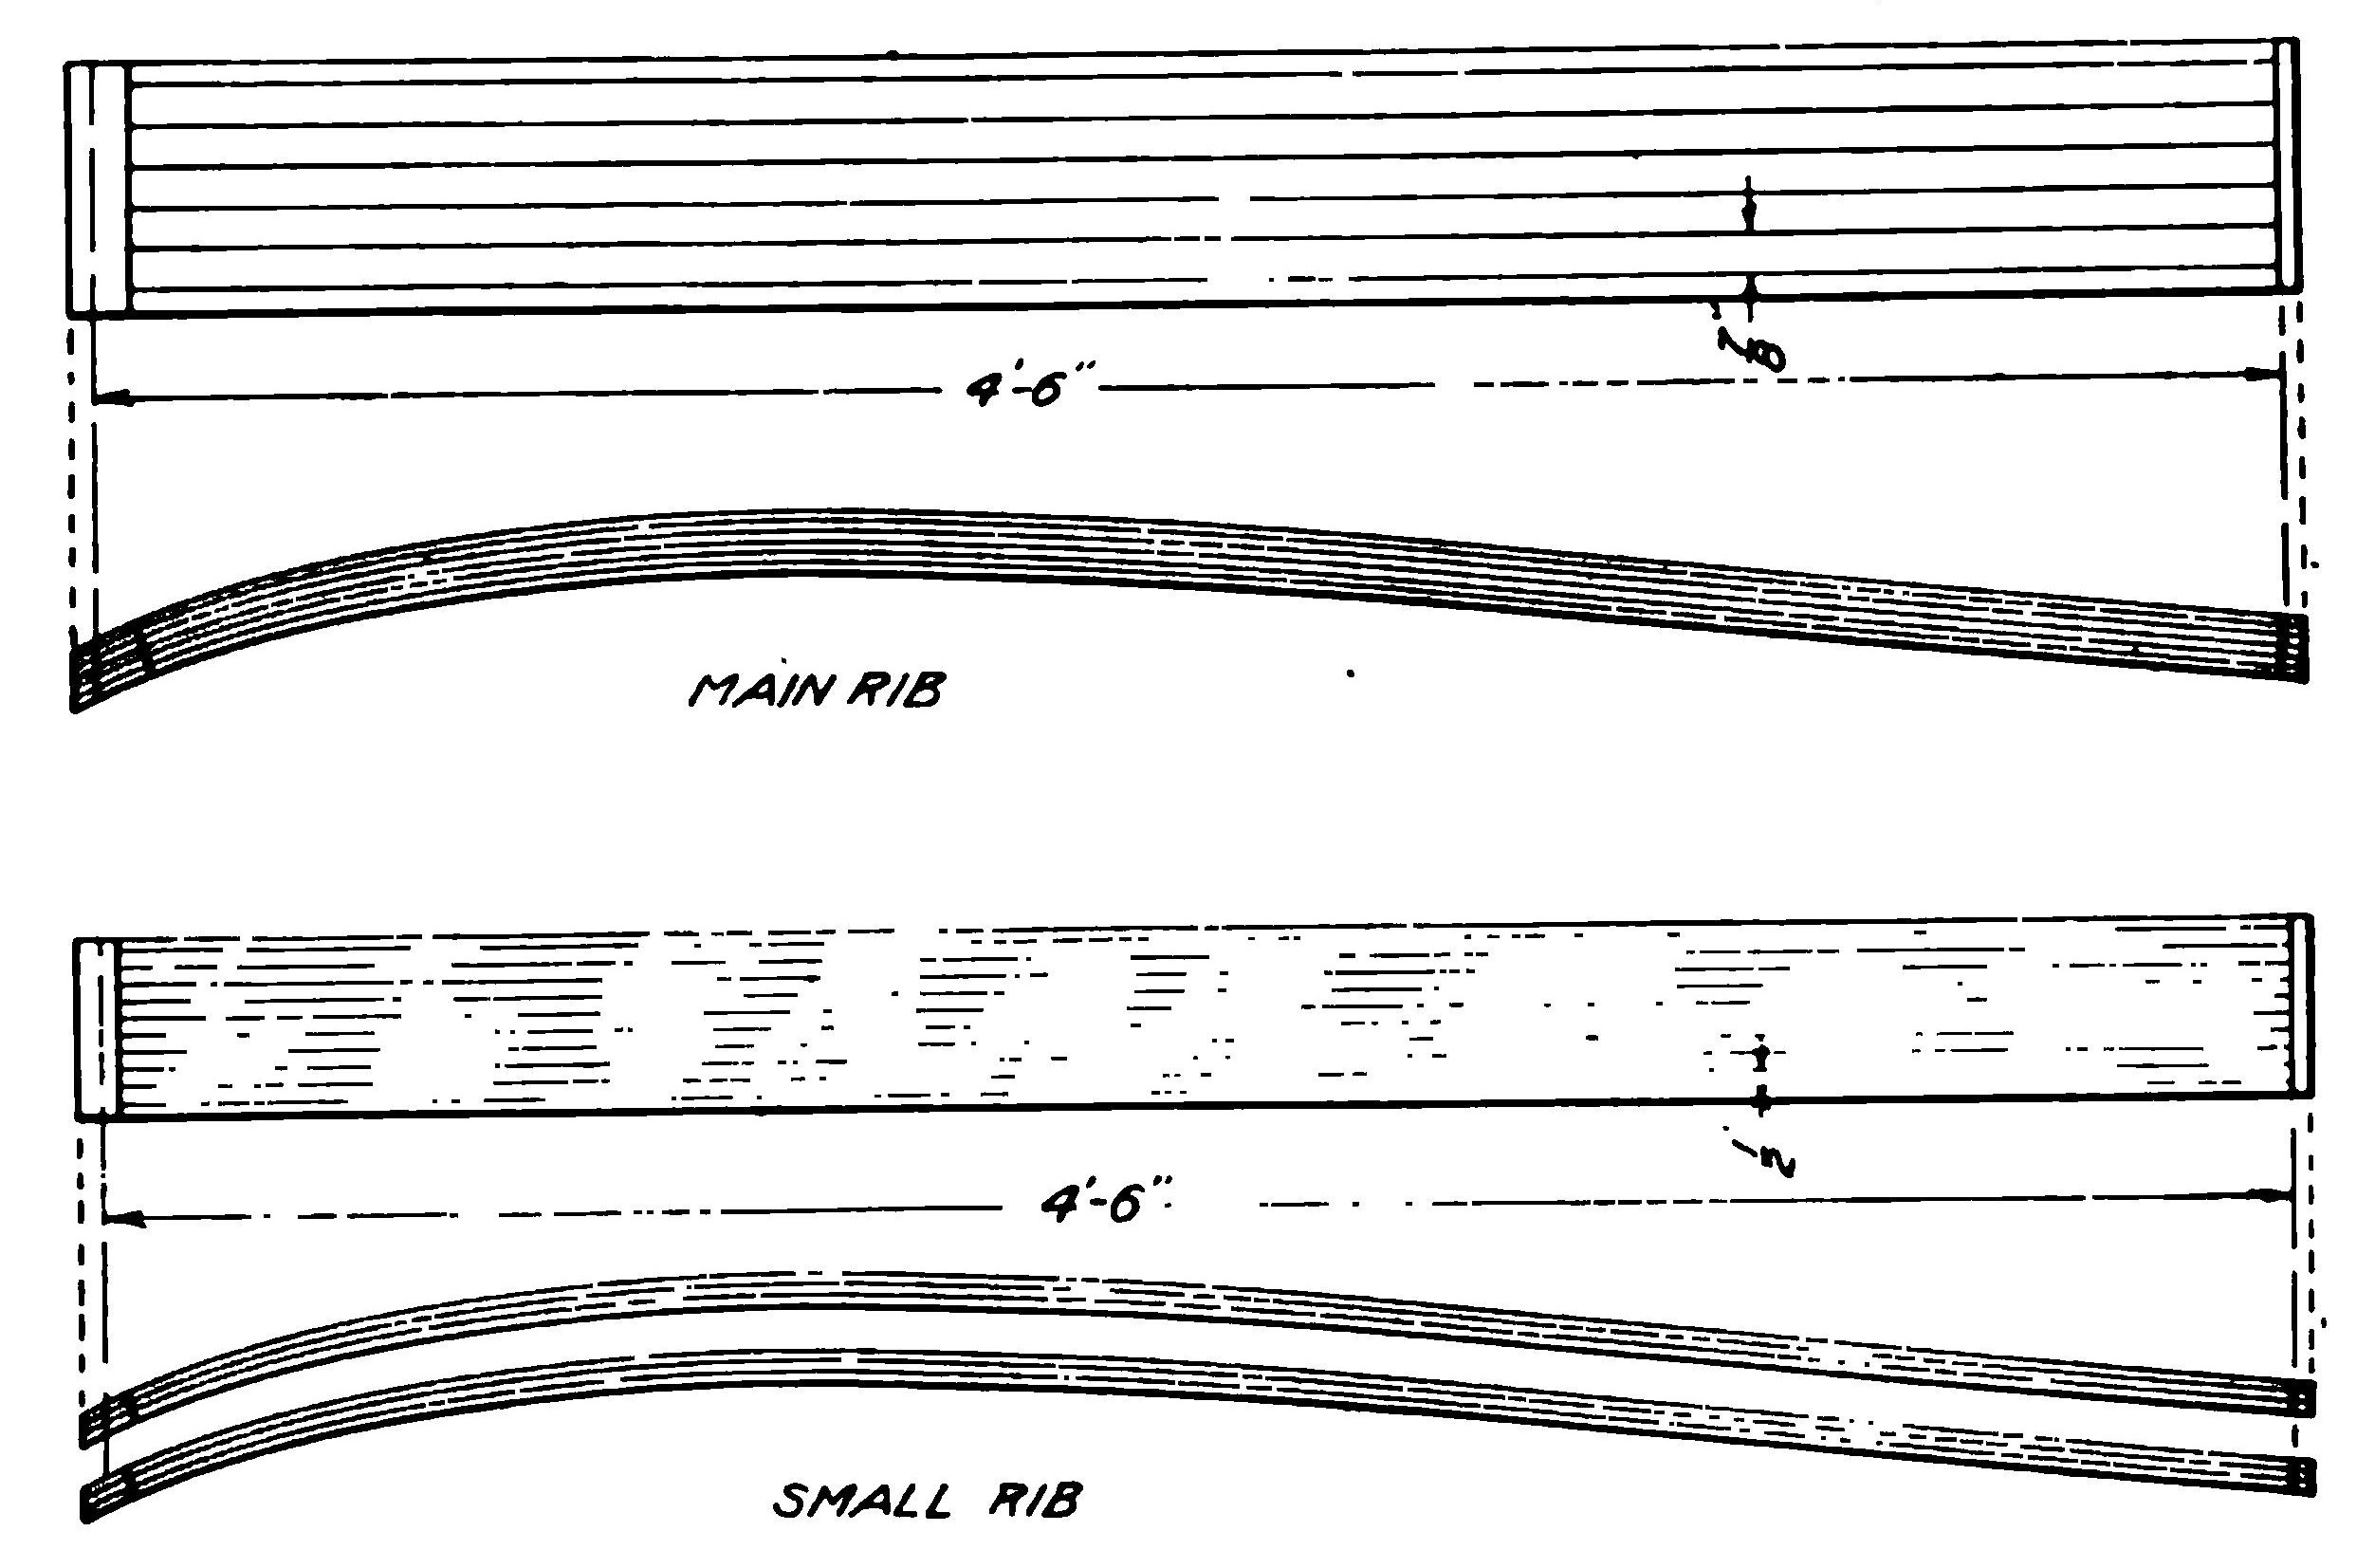 Fig 13. Details of Main and Small Ribs, Curtiss Biplane